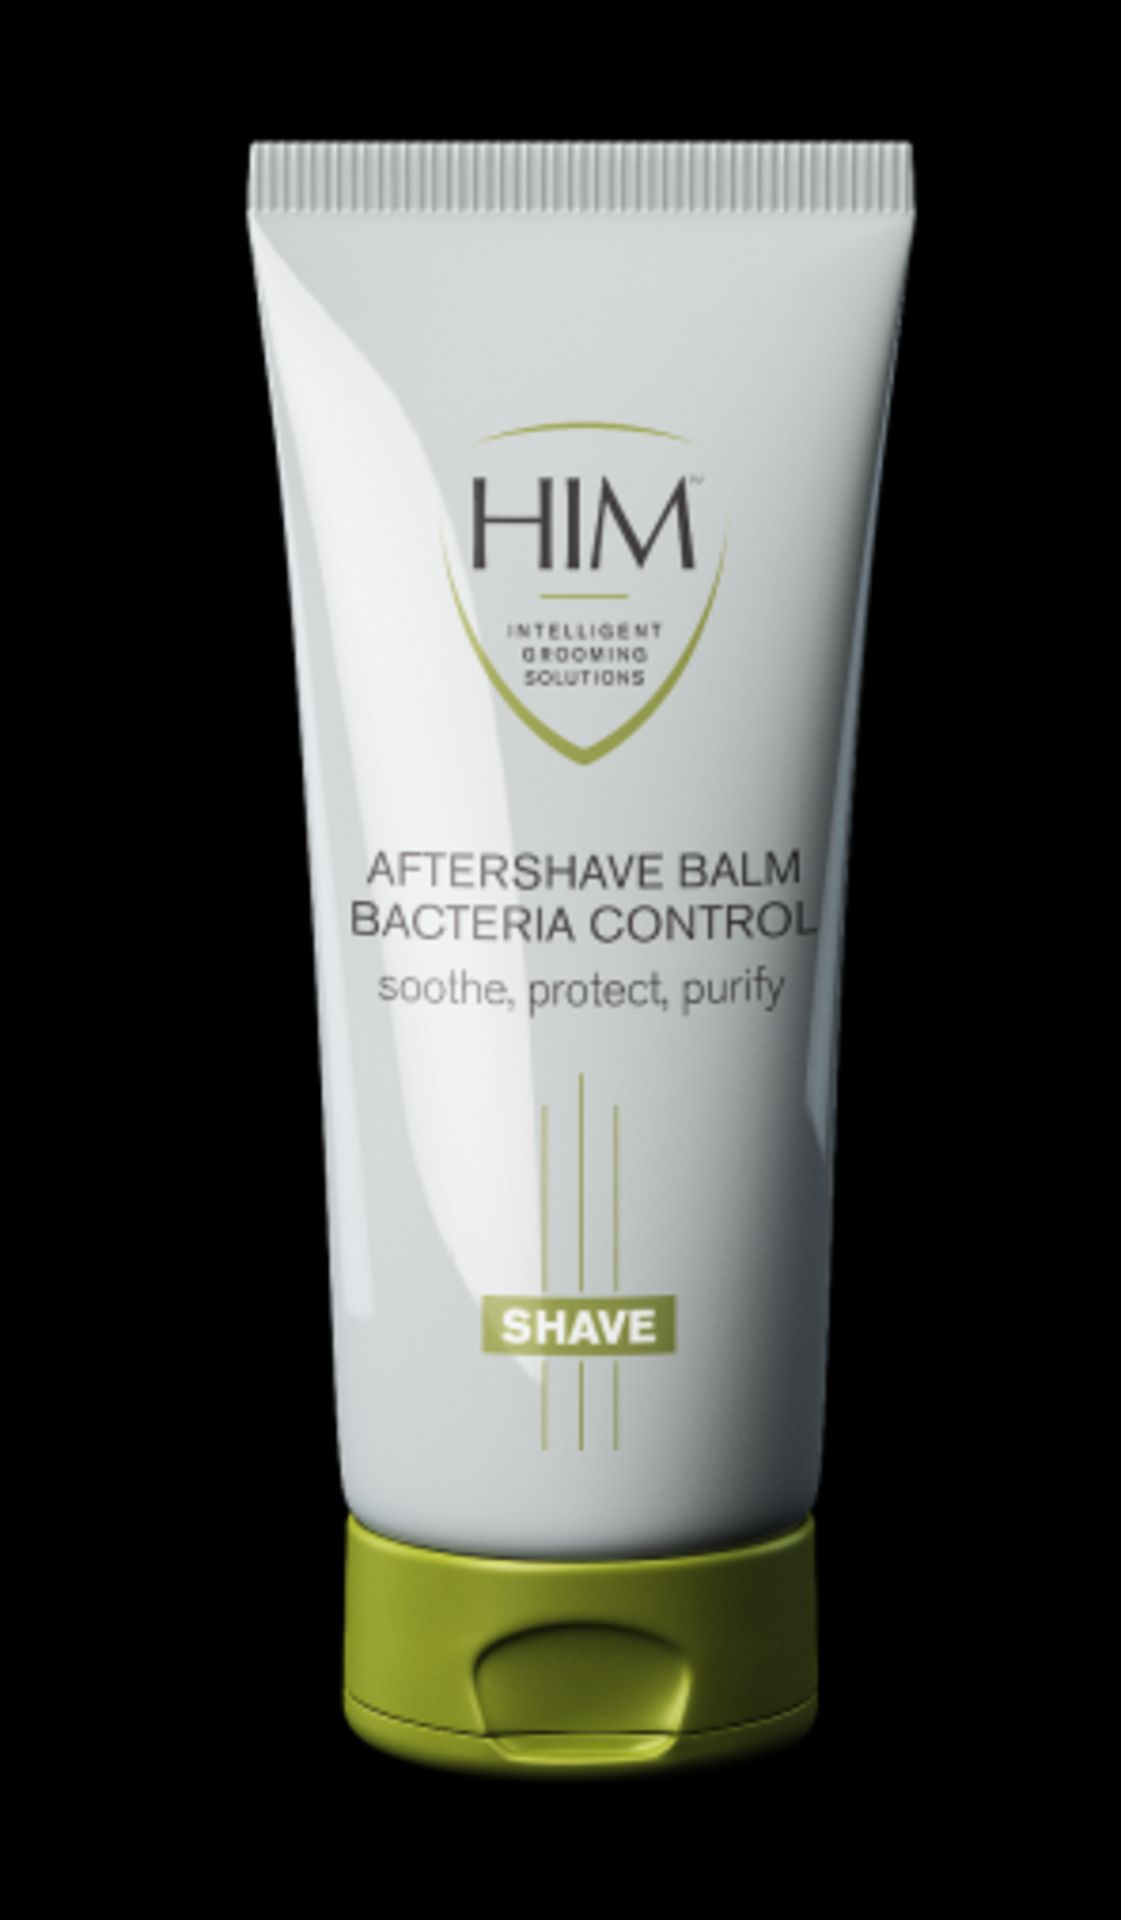 20 x HIM Intelligent Grooming Solutions - 75ml AFTERSHAVE BALM BACTERIA CONTROL - Brand New